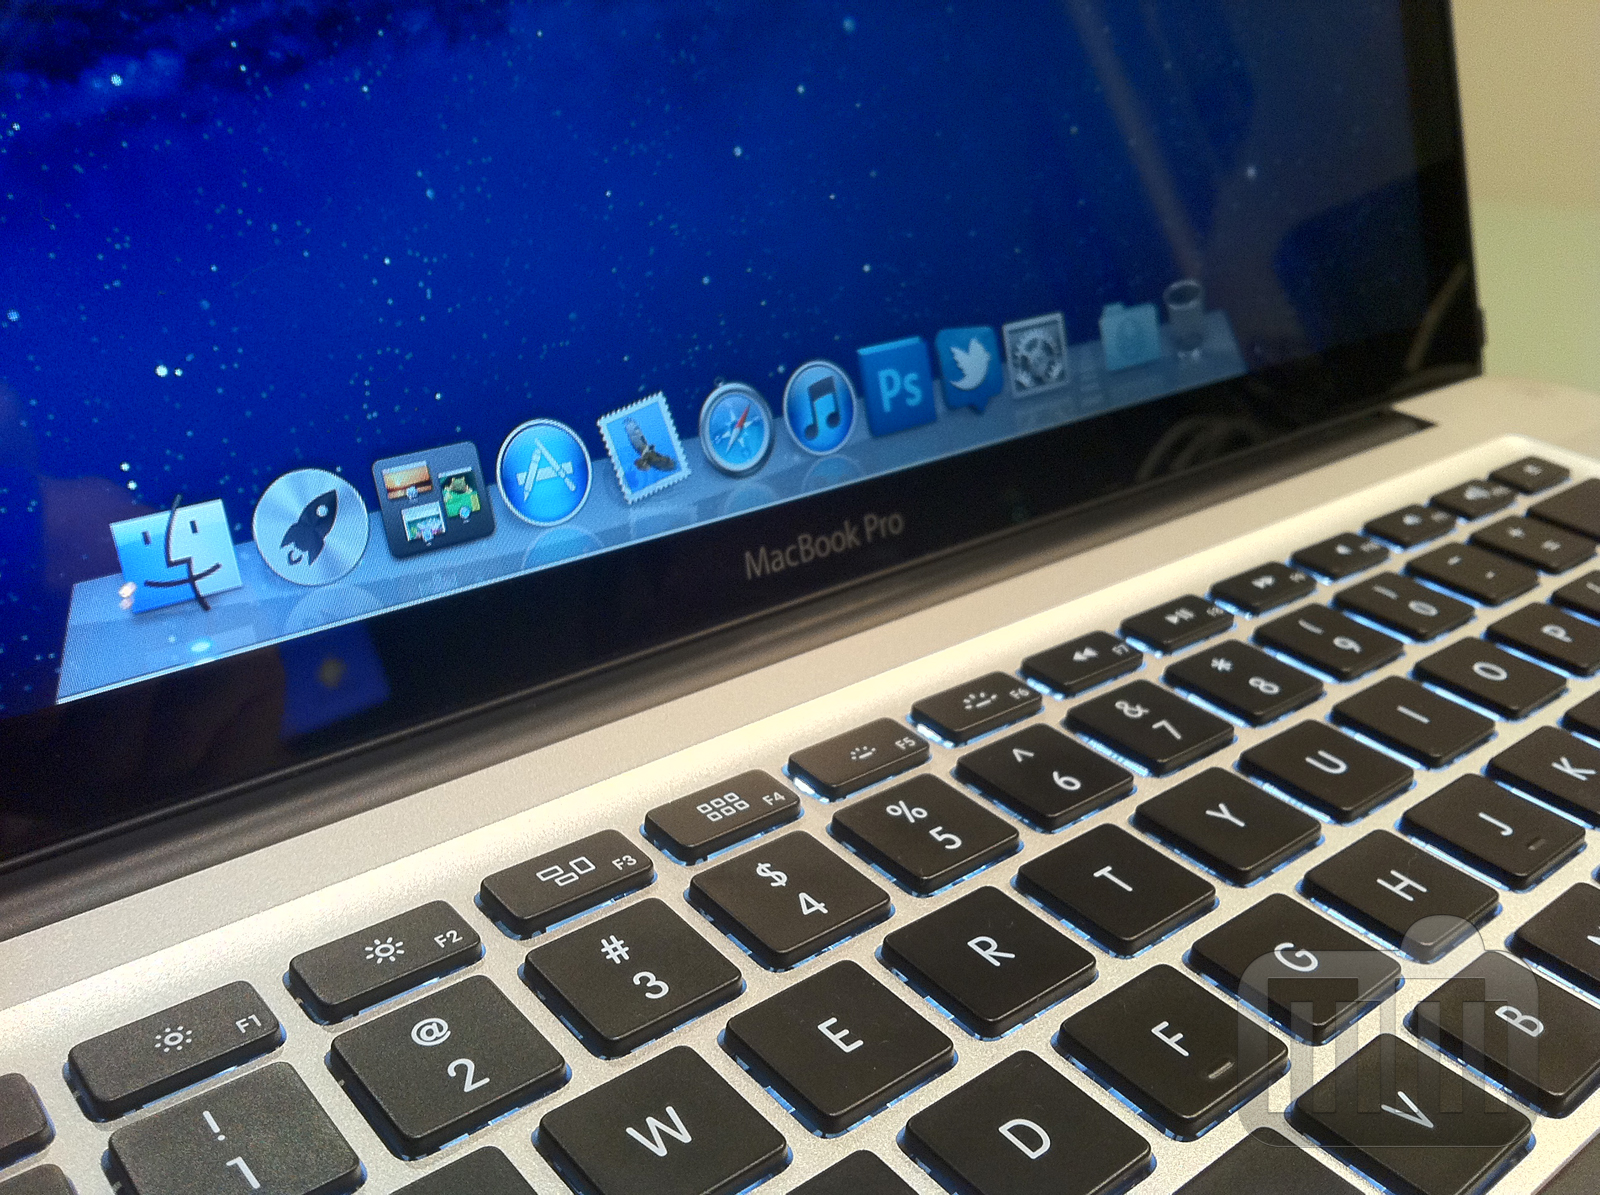 Review: MacBook Pro 15-inch unibody (“Early 2011” model)